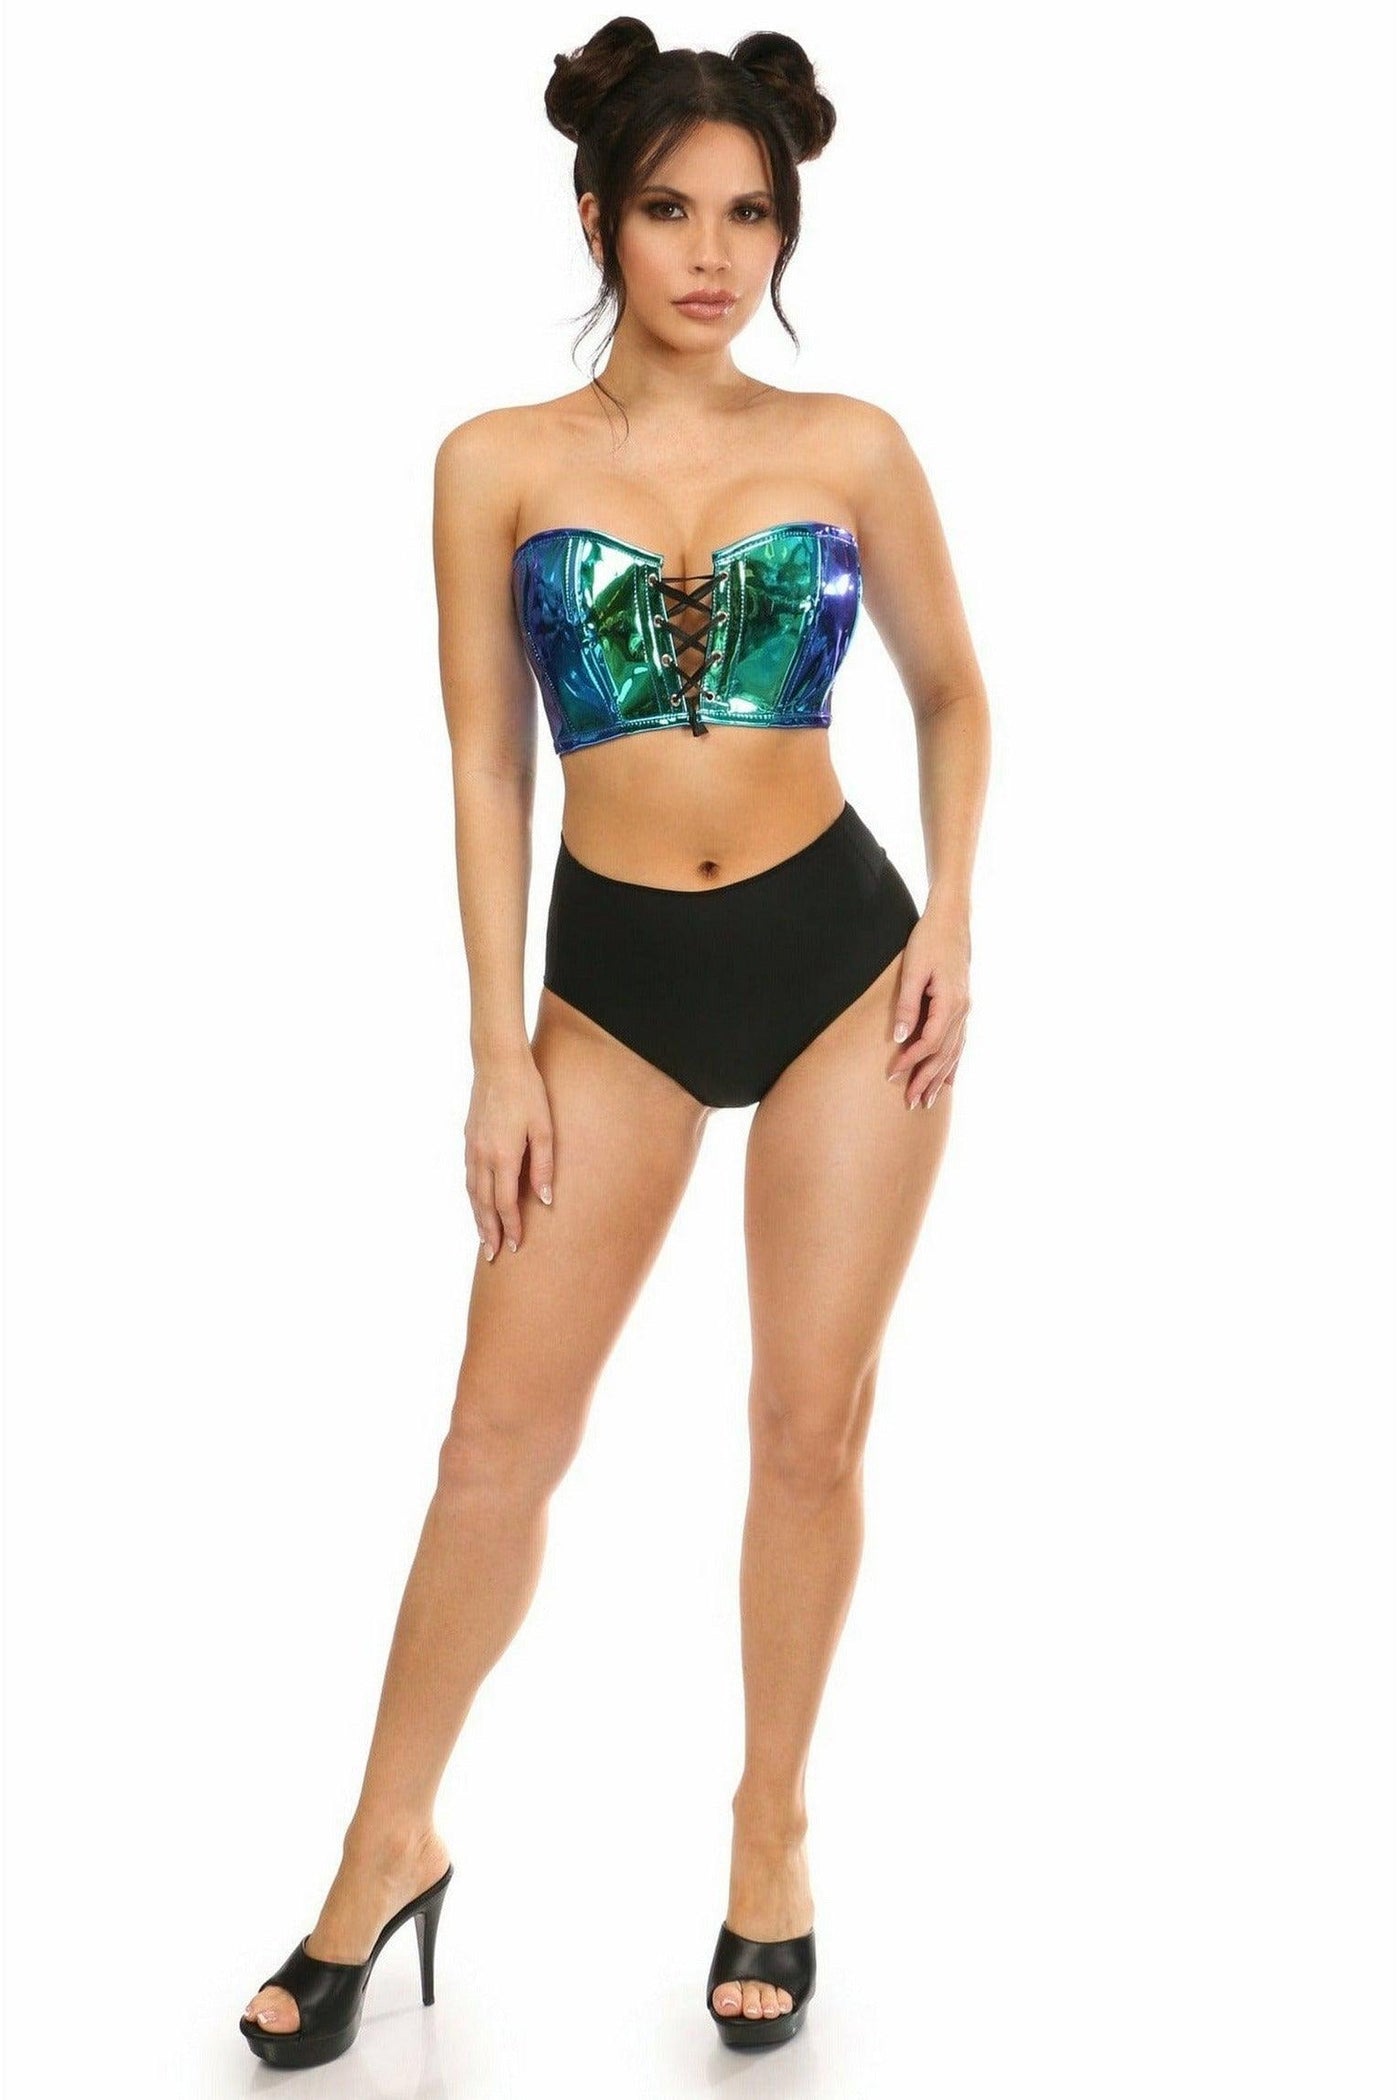 Lavish Teal/Blue Holo Lace-Up Short Bustier Top - AMIClubwear